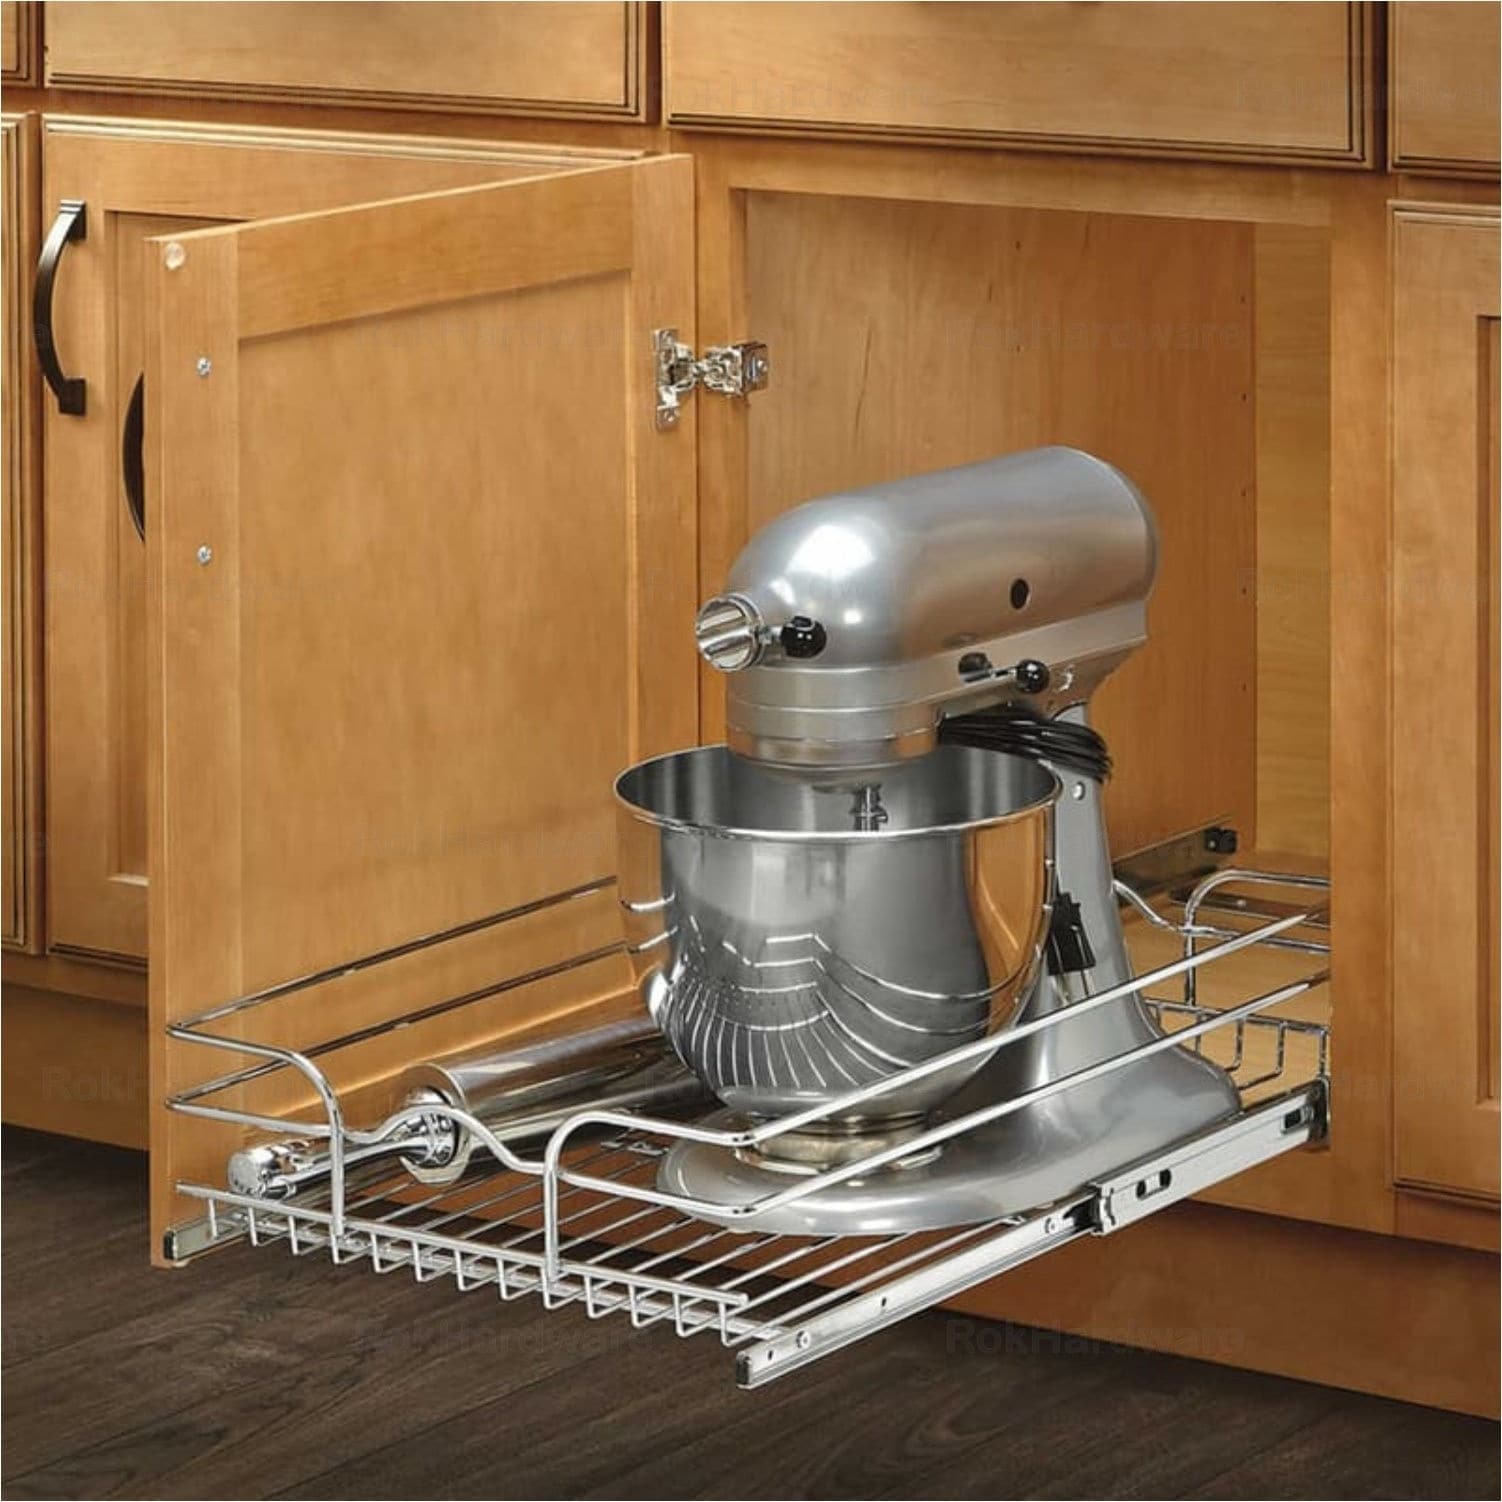 https://ak1.ostkcdn.com/images/products/13446440/Rev-A-Shelf-5WB-Series-Chrome-finished-Metal-Wire-12-inch-Single-Pull-out-Basket-d3ac75c9-325d-40e2-918b-f1bab3d60815.jpg